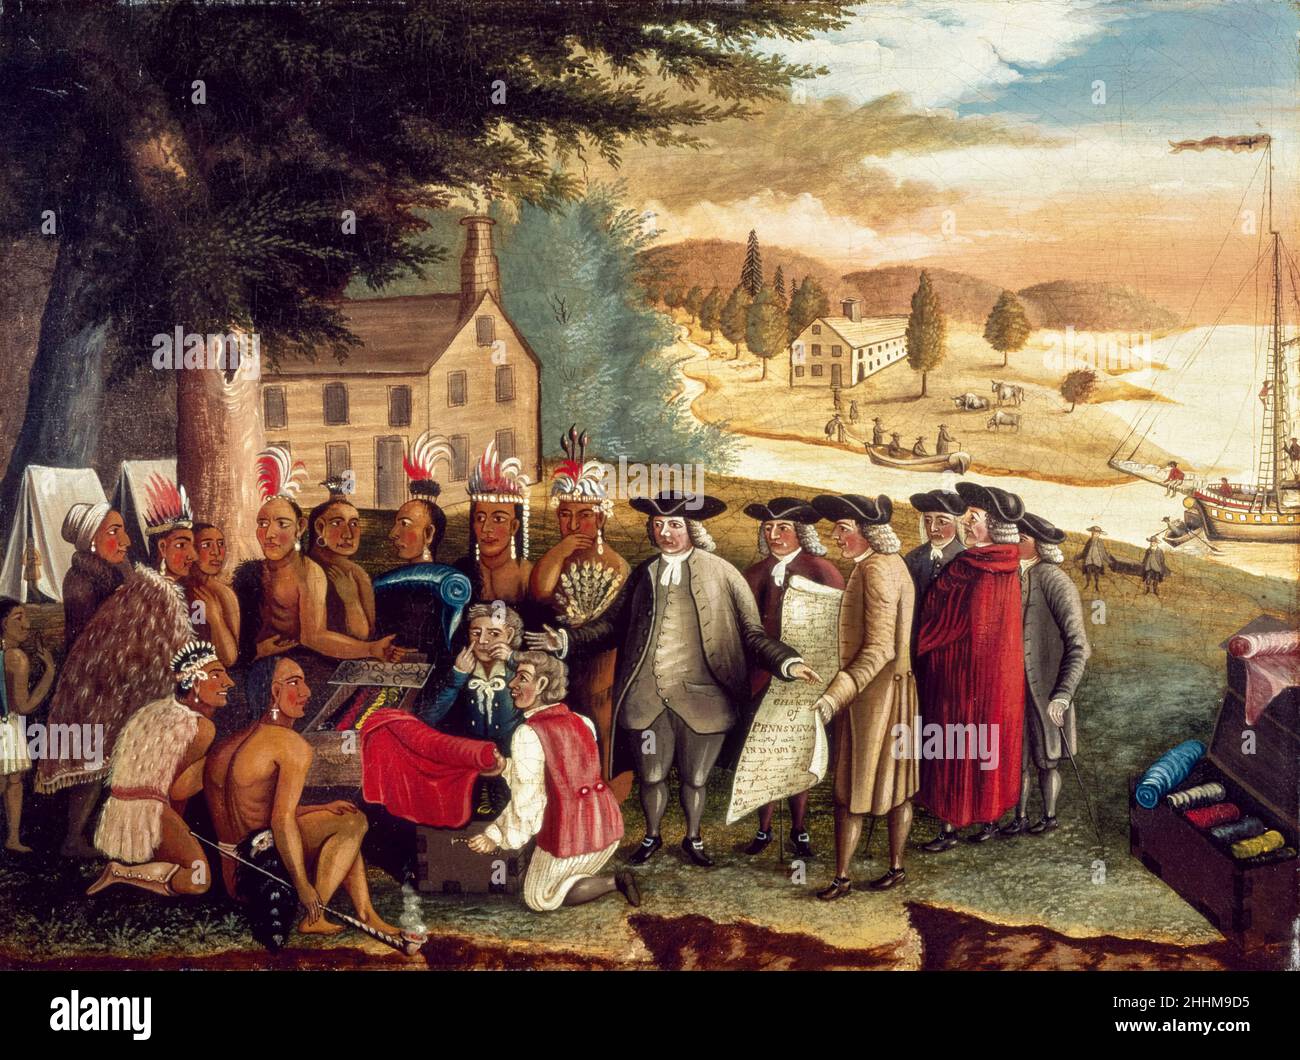 (William) Penn's Treaty with the Indians, painting by Edward Hicks, 1830-1840 Stock Photo